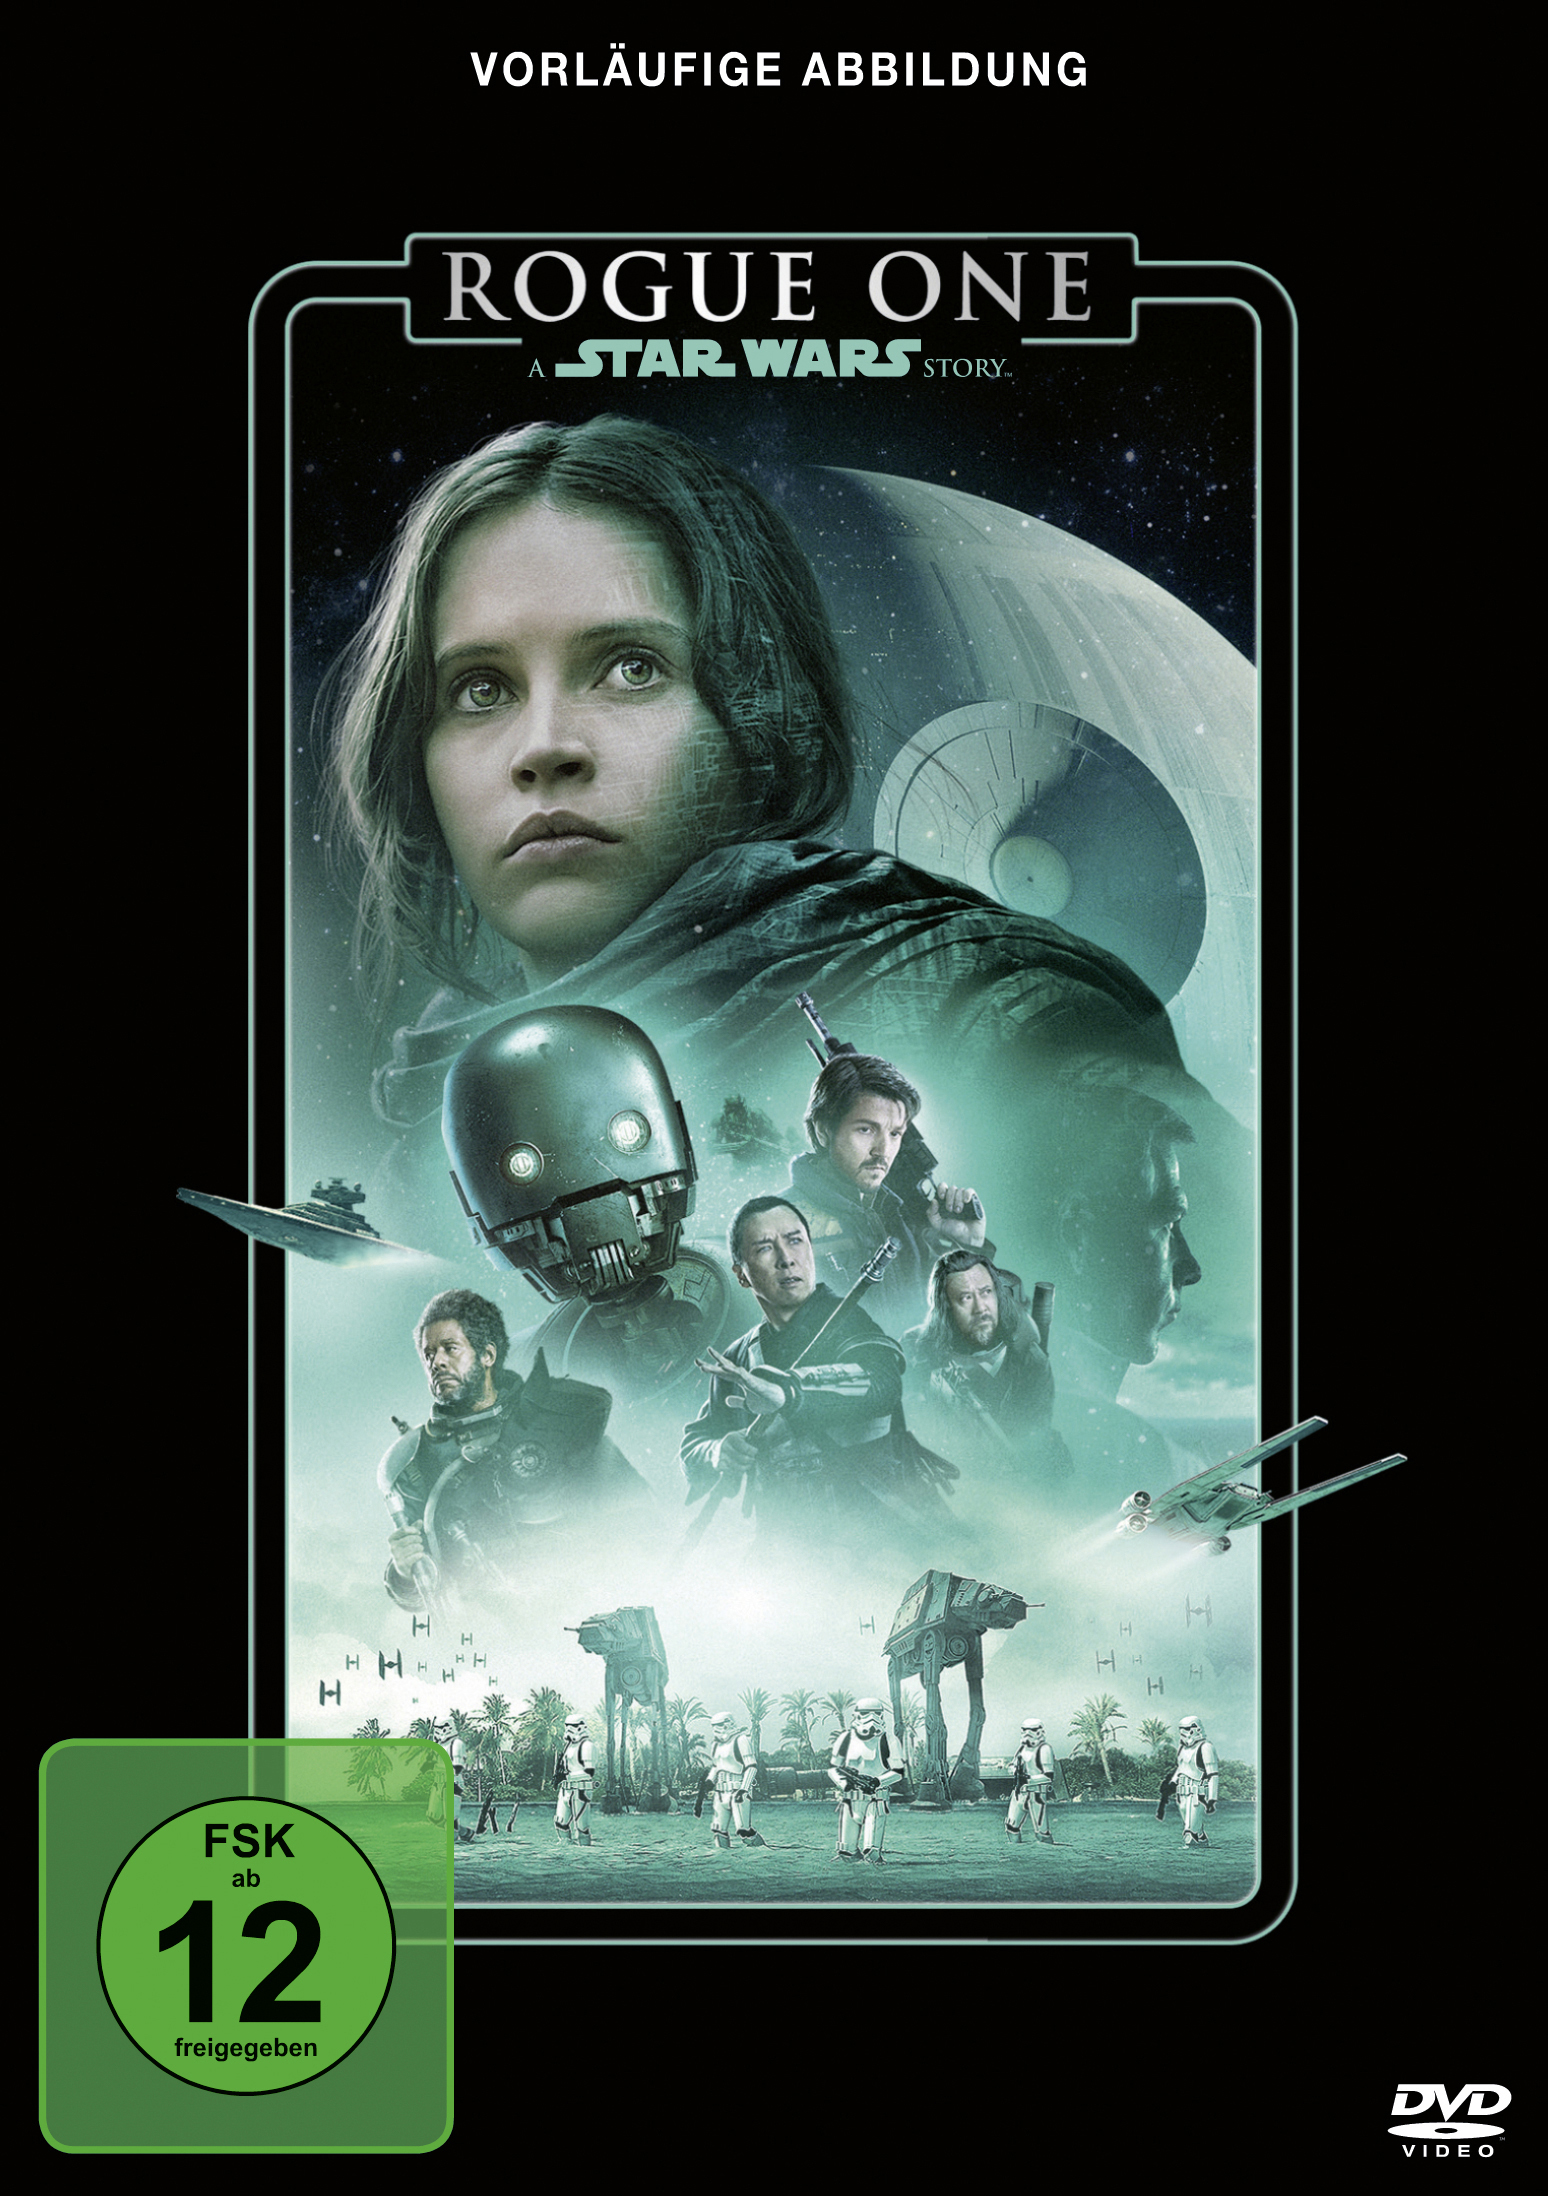 Rogue Story Wars DVD One: A Star